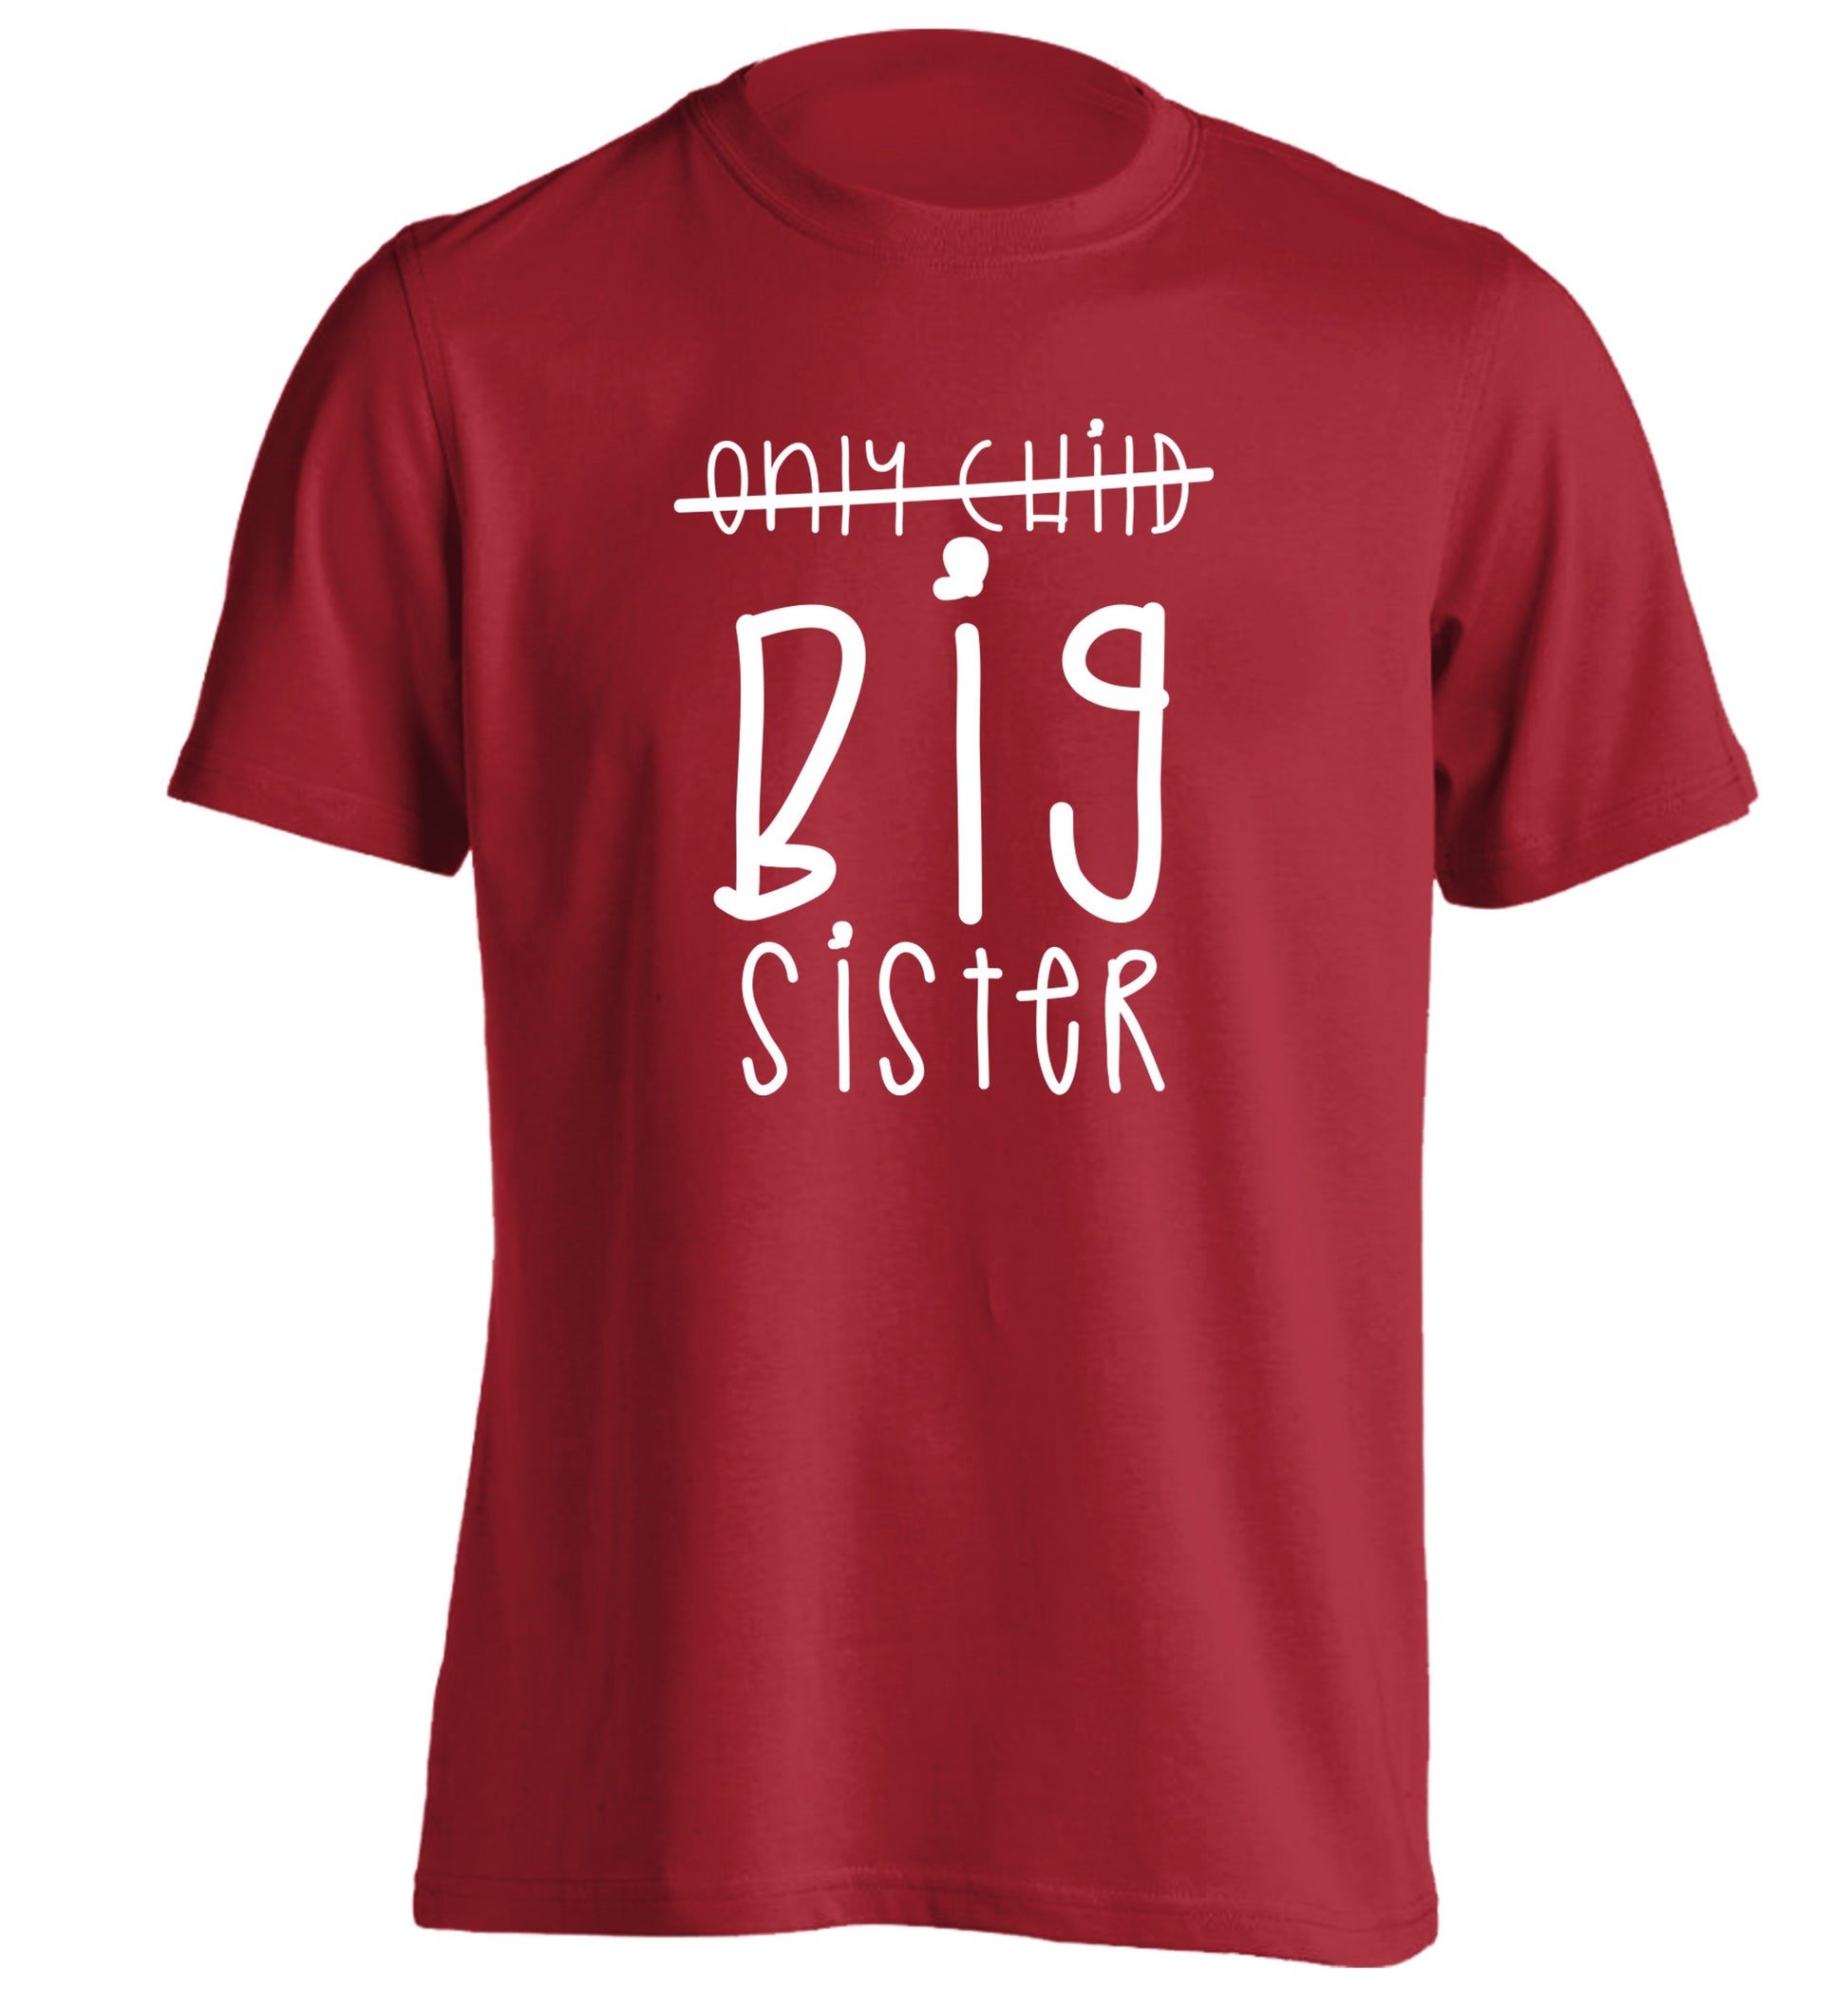 Only child big sister adults unisex red Tshirt 2XL